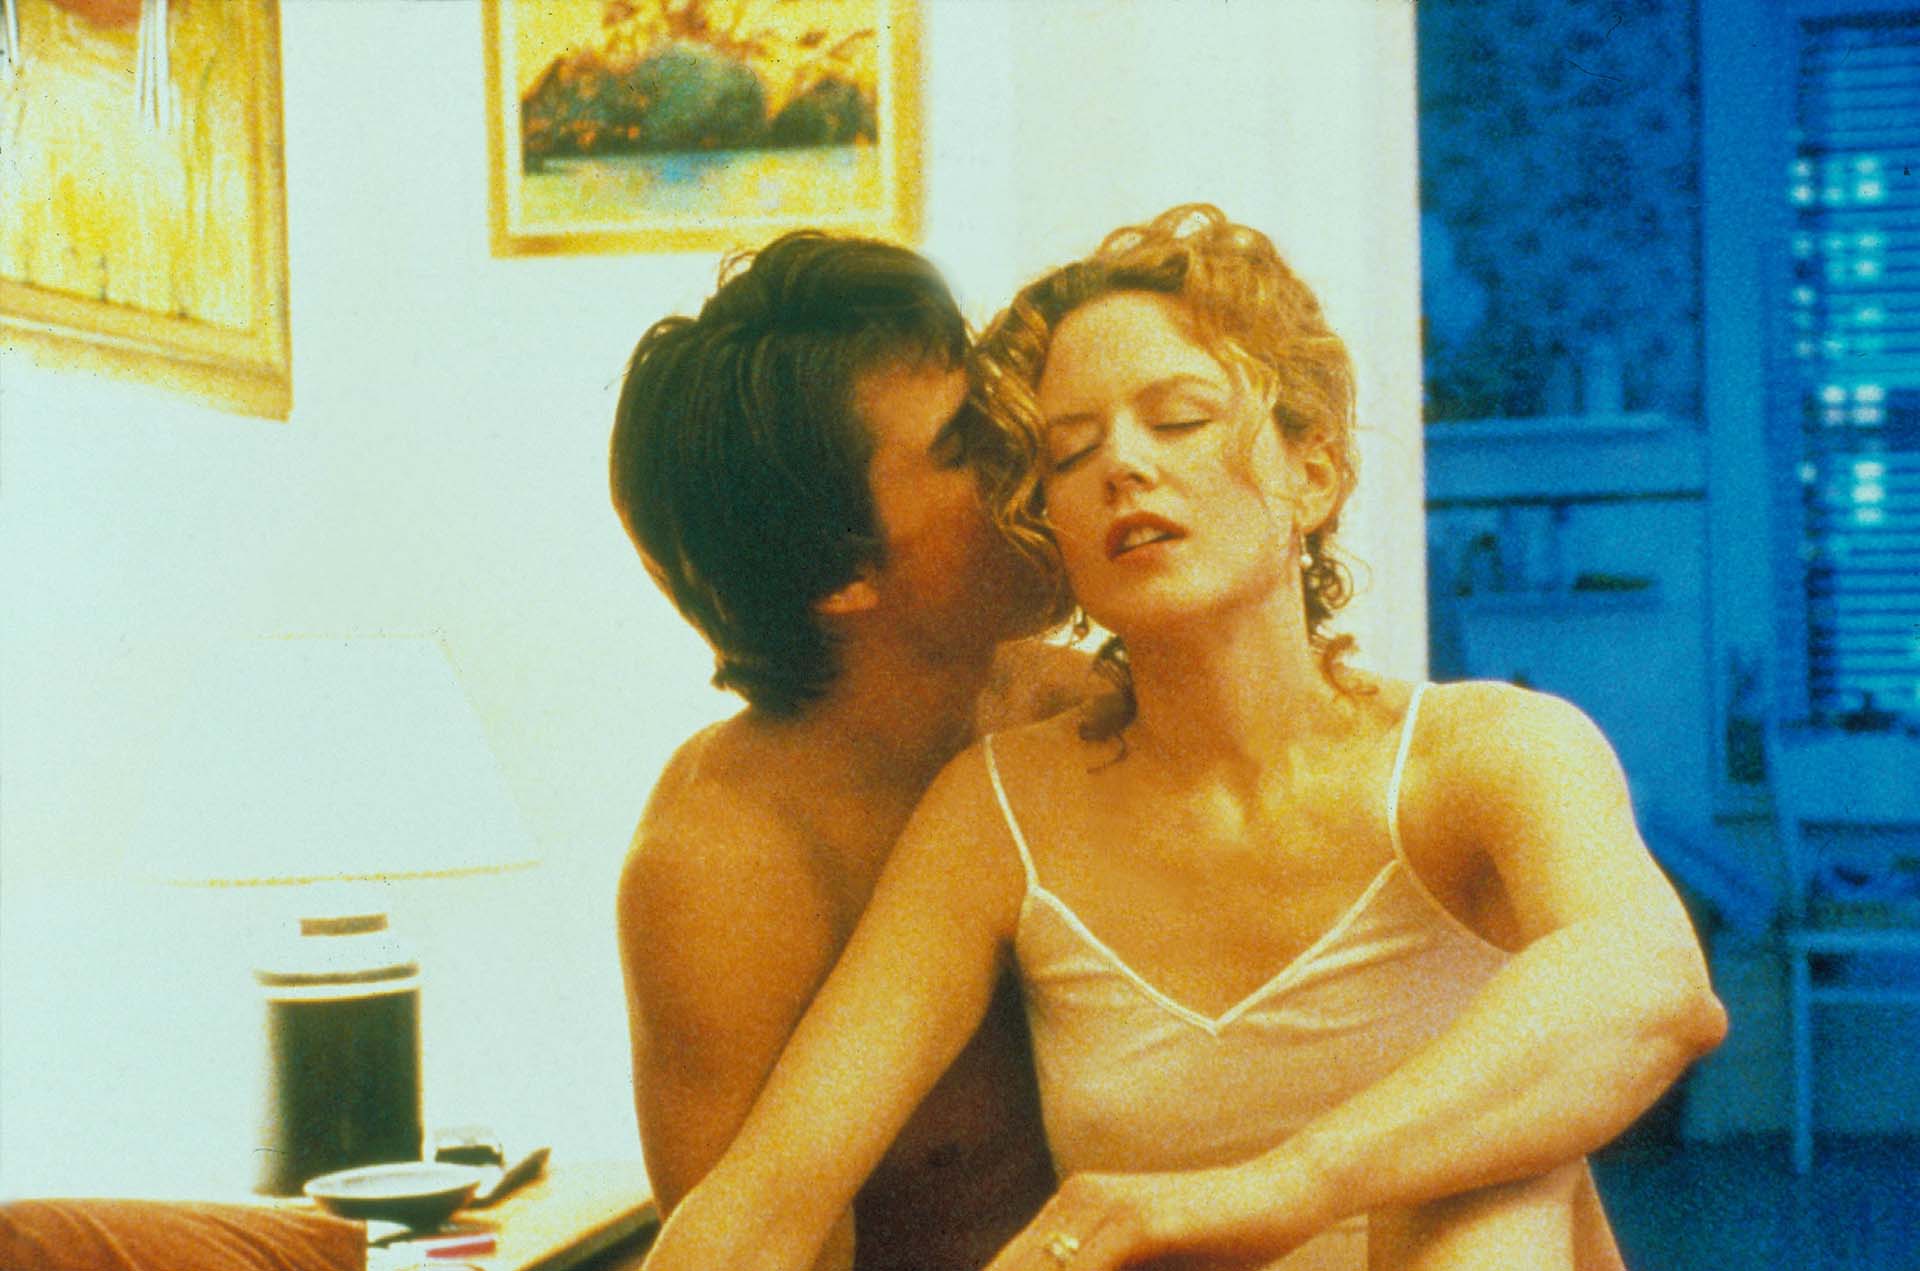 Nicole Kidman met Tom Cruise in Eyes Wide Shut and they had a great love